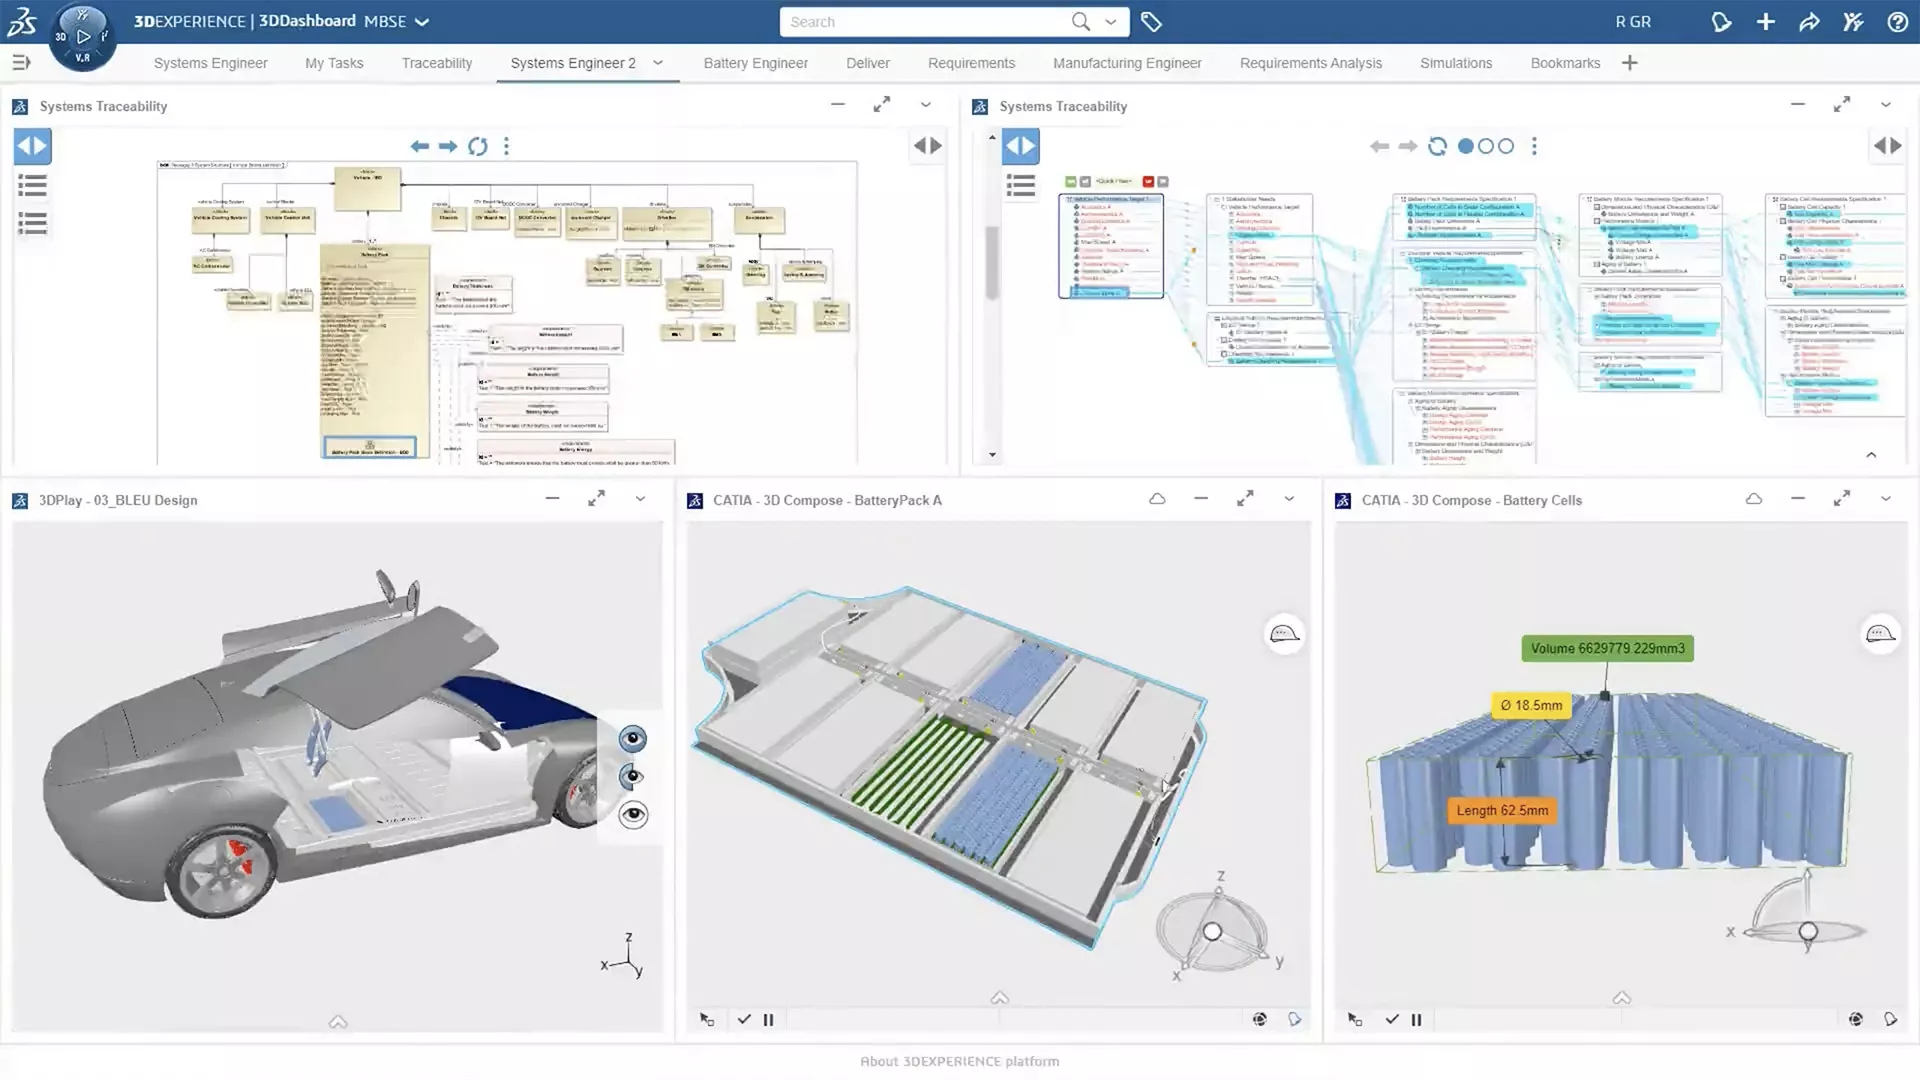 A 3D-enabled MBSE dashboard using product data on the 3DEXPERIENCE cloud platform